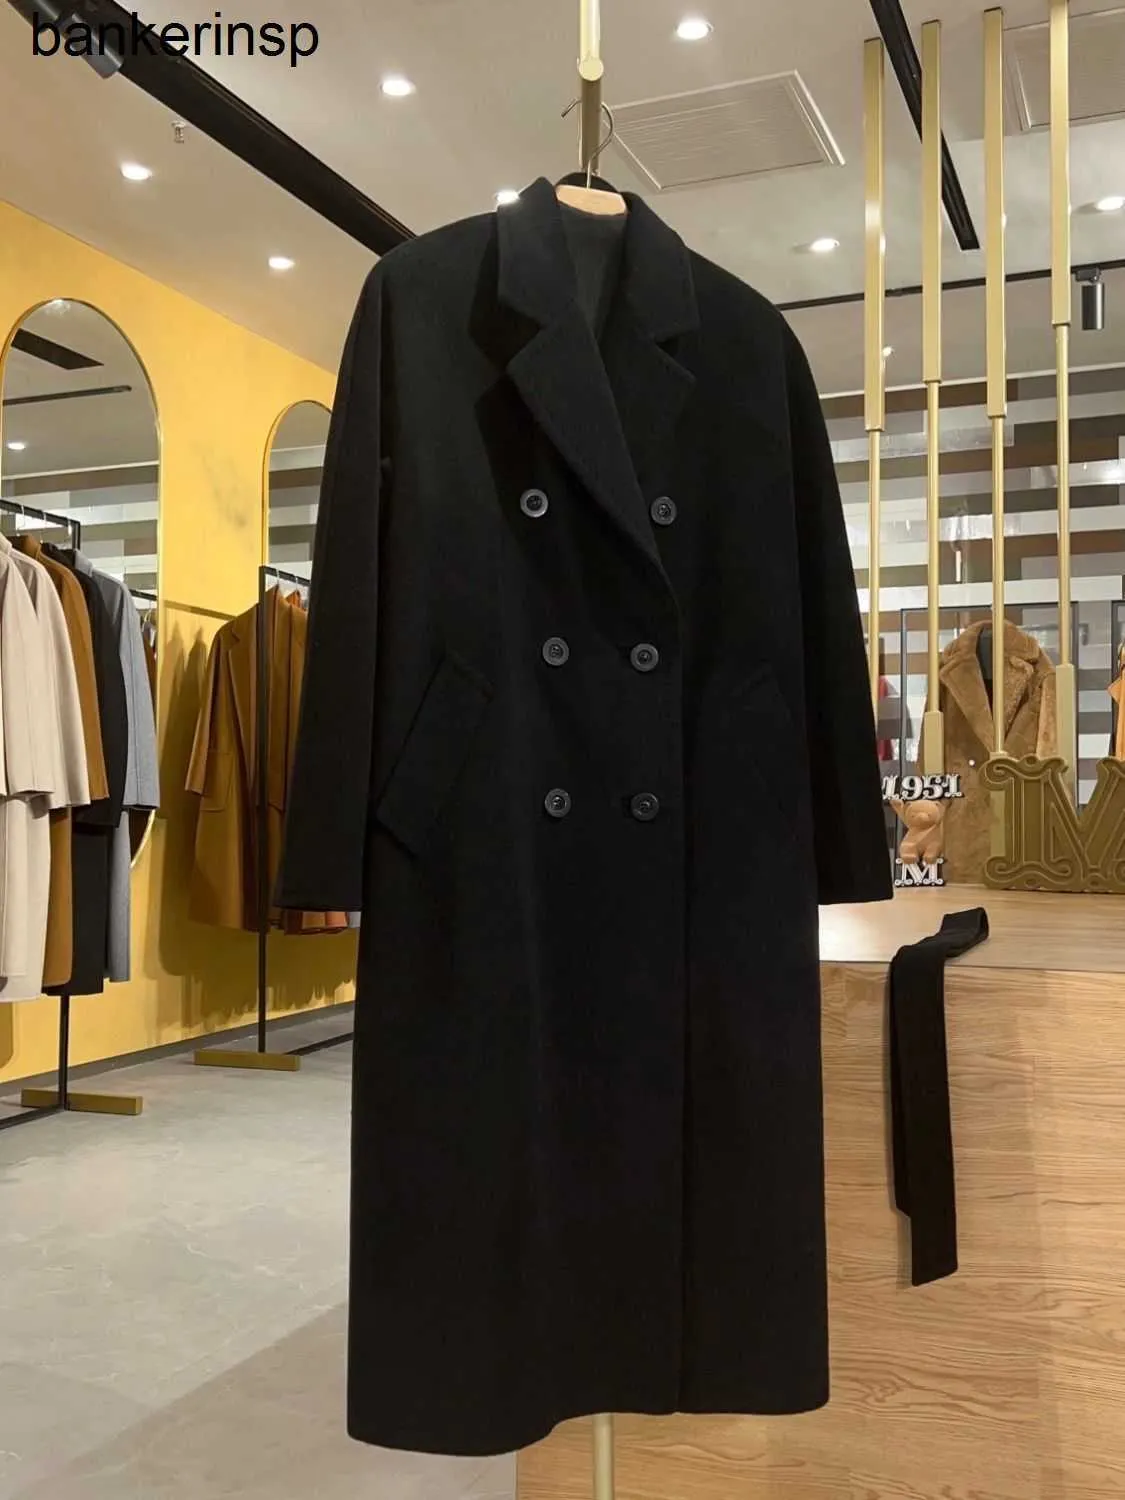 Top Luxury Coat Maxmaras 101801 Pure Wool Coat Winter Classic Black Double breasted Cashmere Coat for Men and Women's High end Long Coat